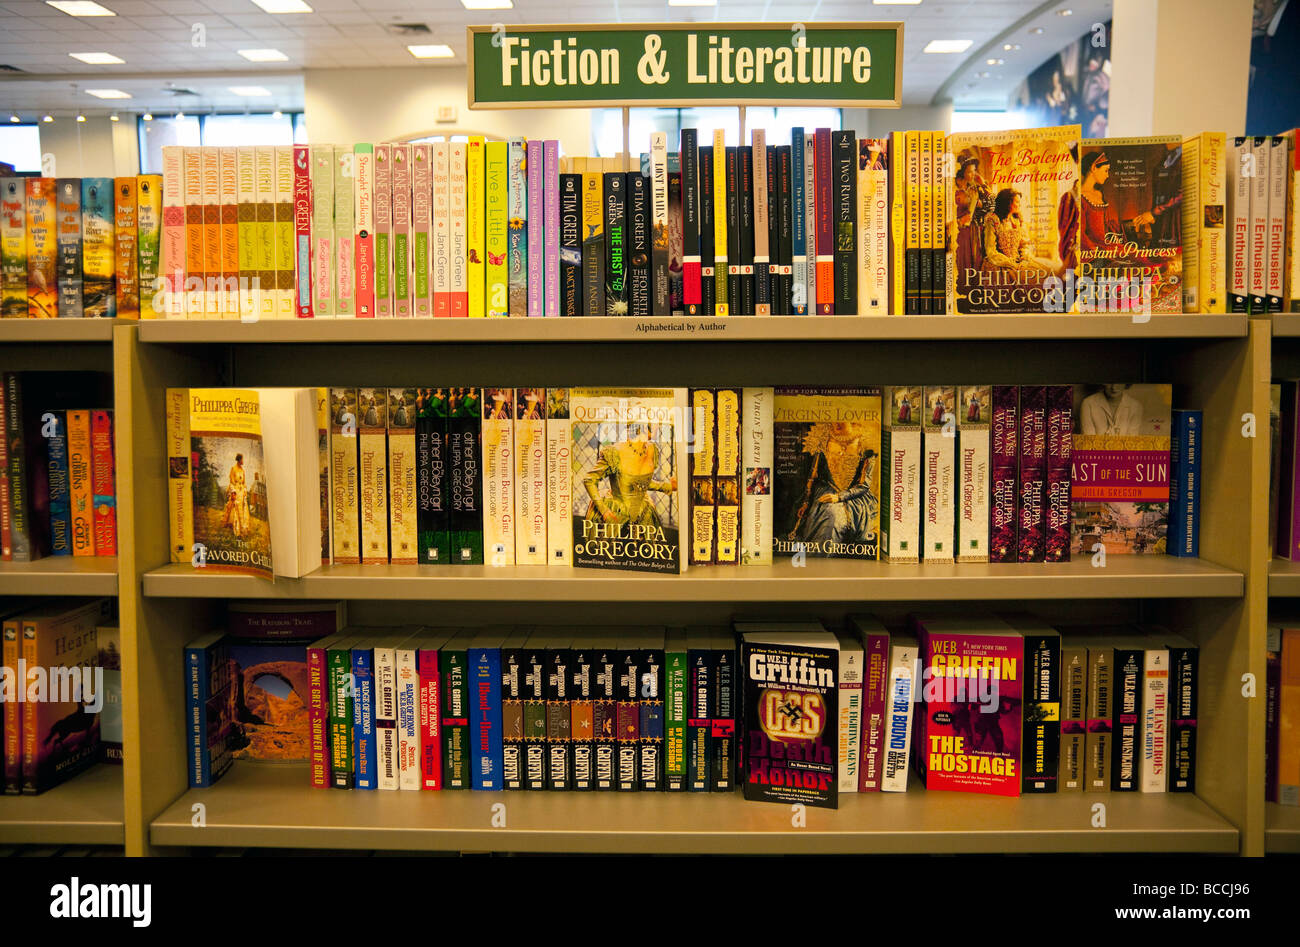 fiction and literature books on shelves, Barnes and Noble, USA Stock